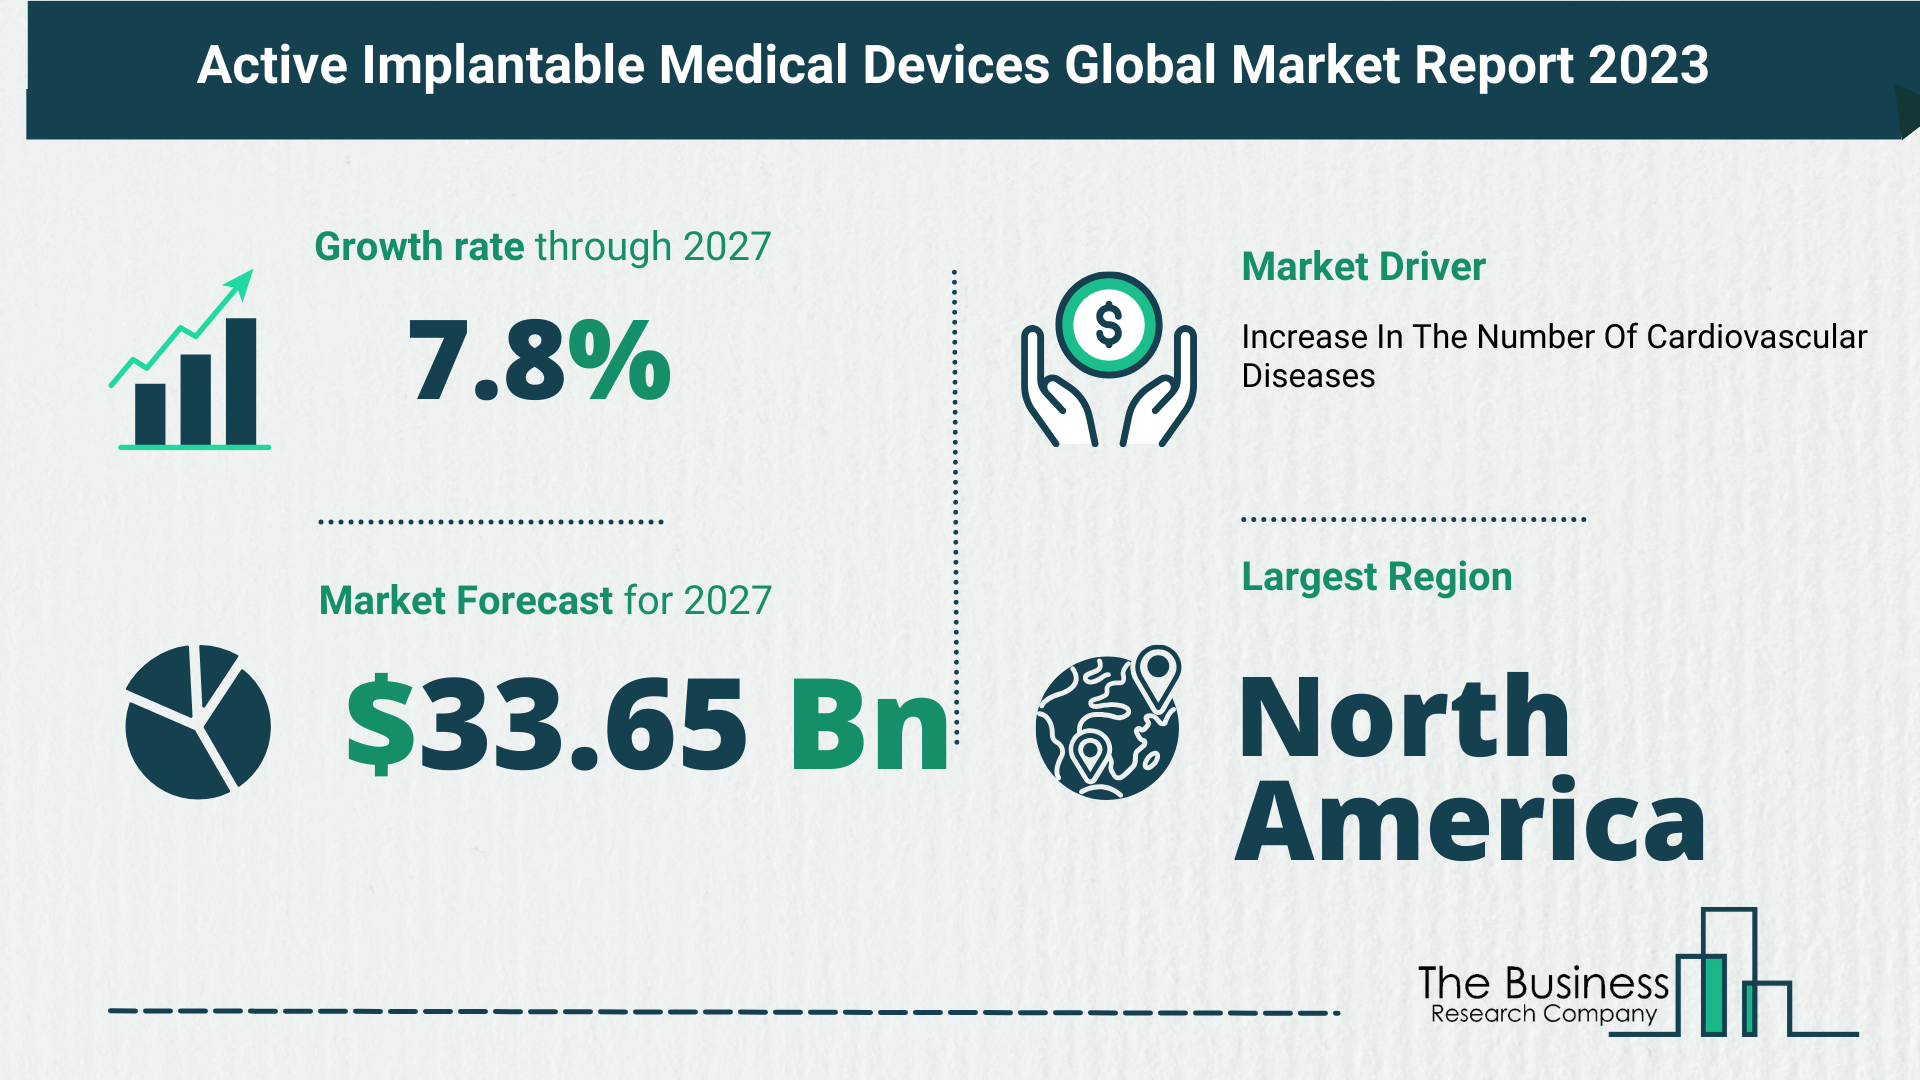 Global Active Implantable Medical Devices Market Analysis: Estimated Market Size And Growth Rate